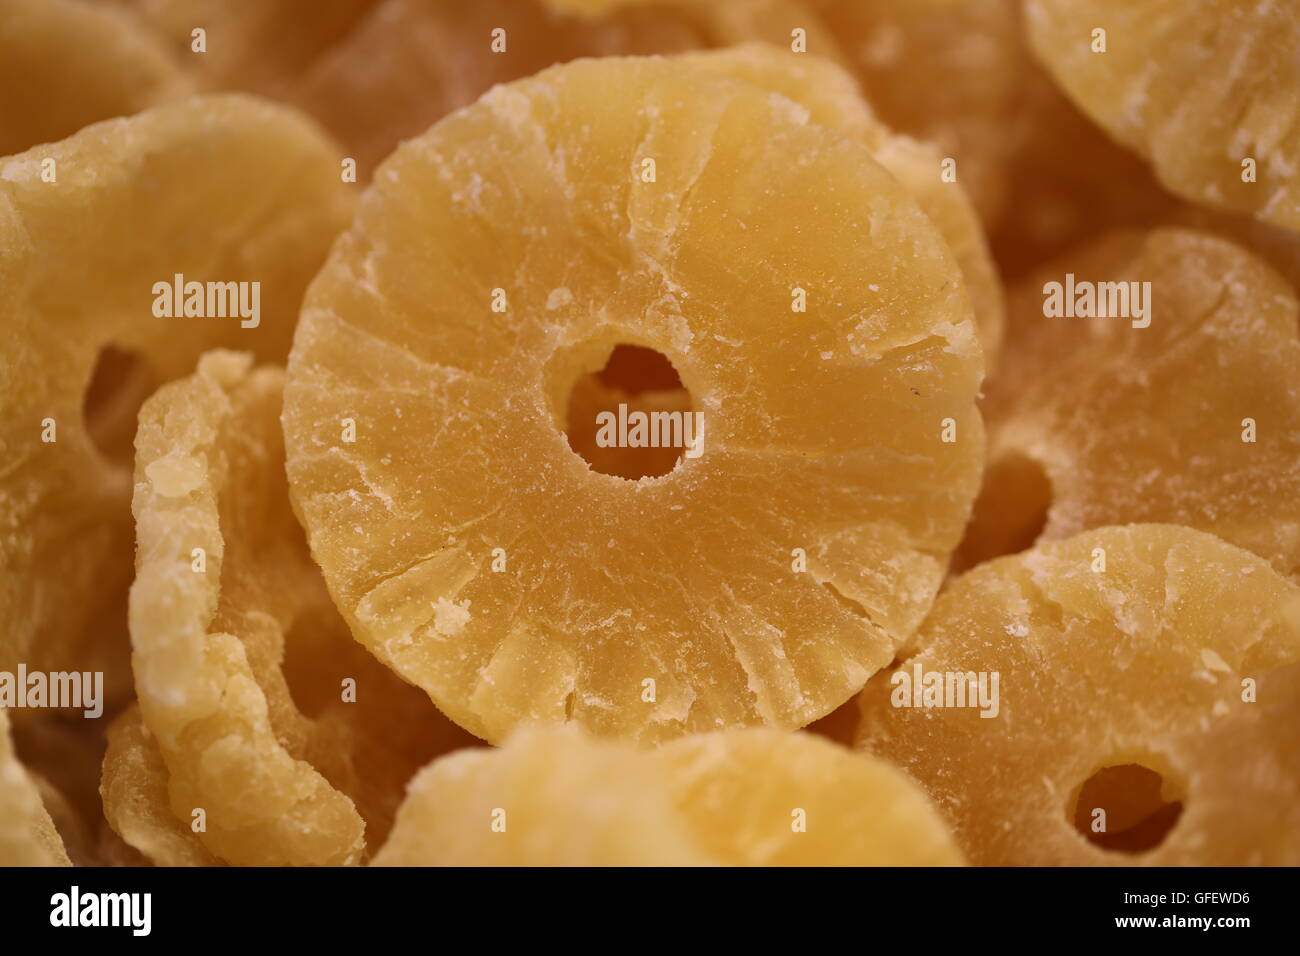 Pineapple Slices, Pineapple Rings. Pile of candied pineapple slices, dehydrated pineapple rings, crystallized Pineapple, close up. Stock Photo